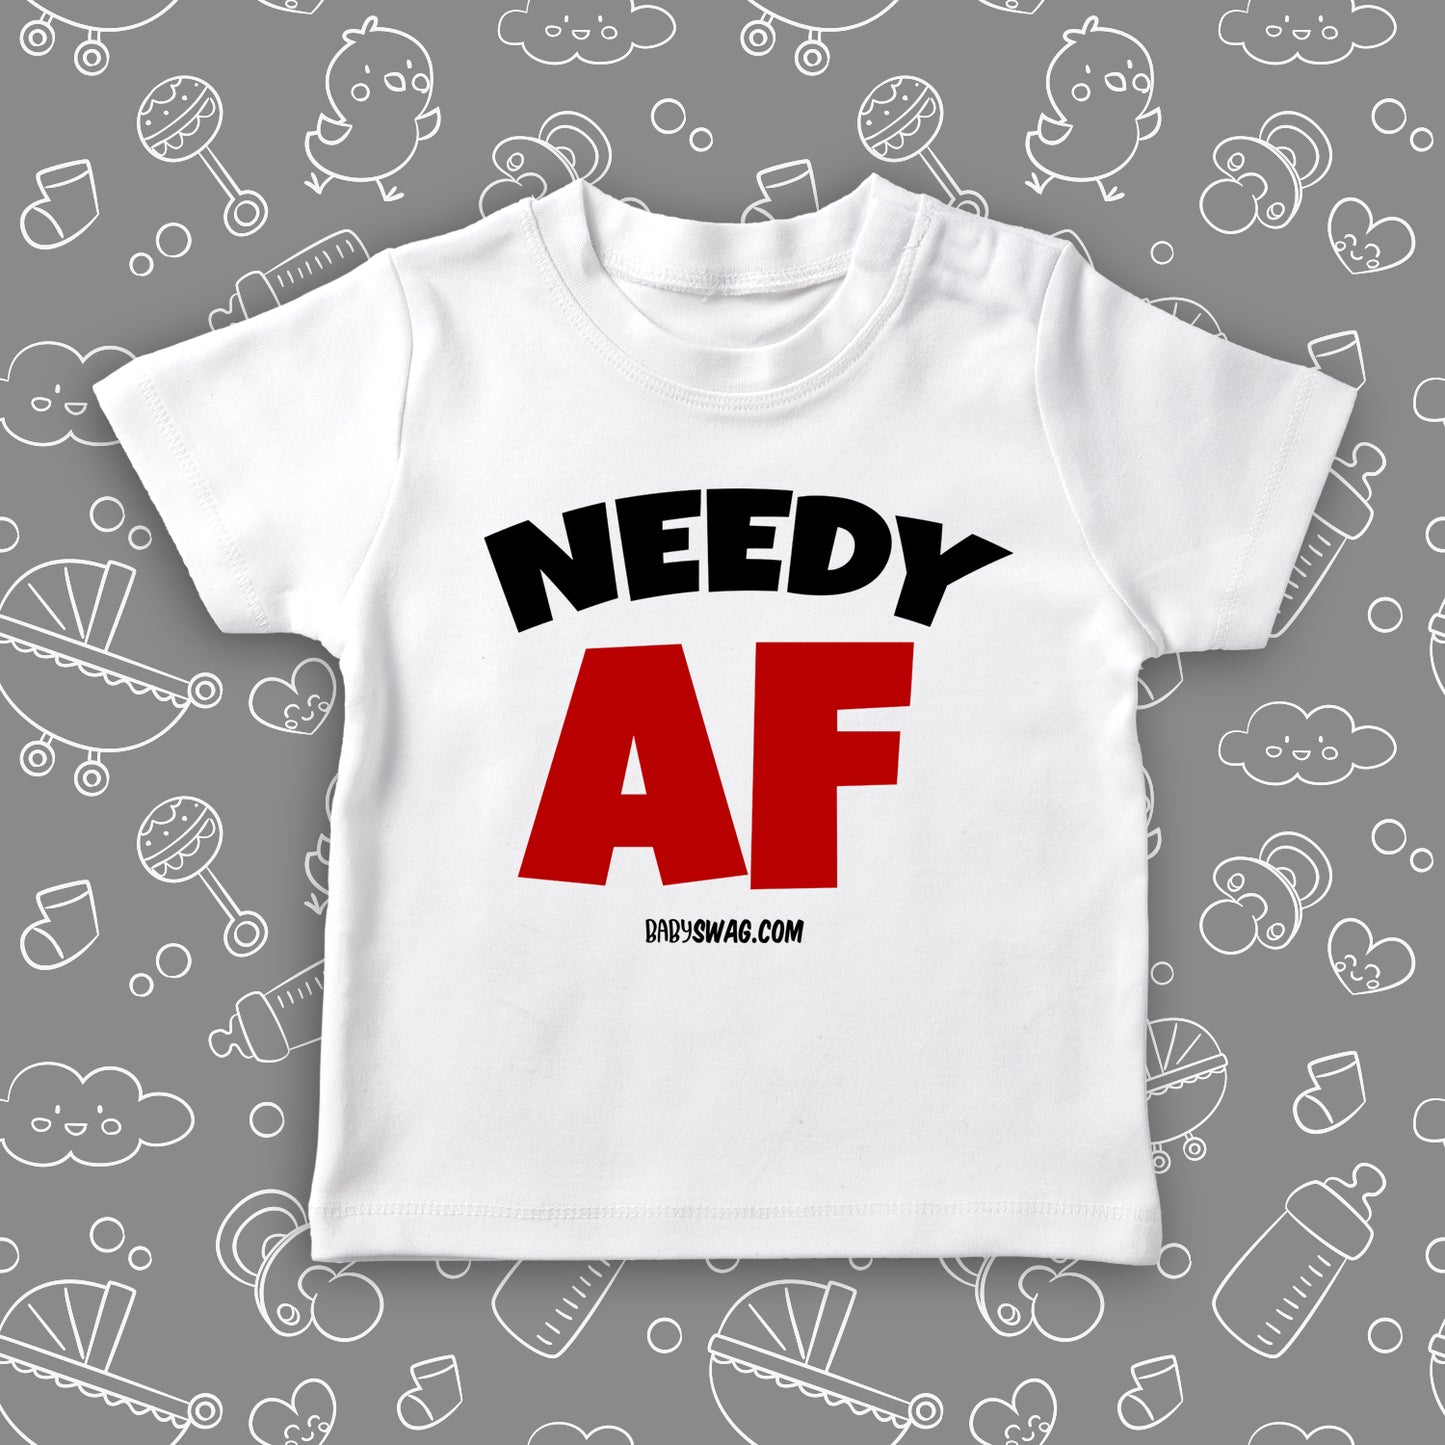 The "Needy AF" funny toddler tee in white.